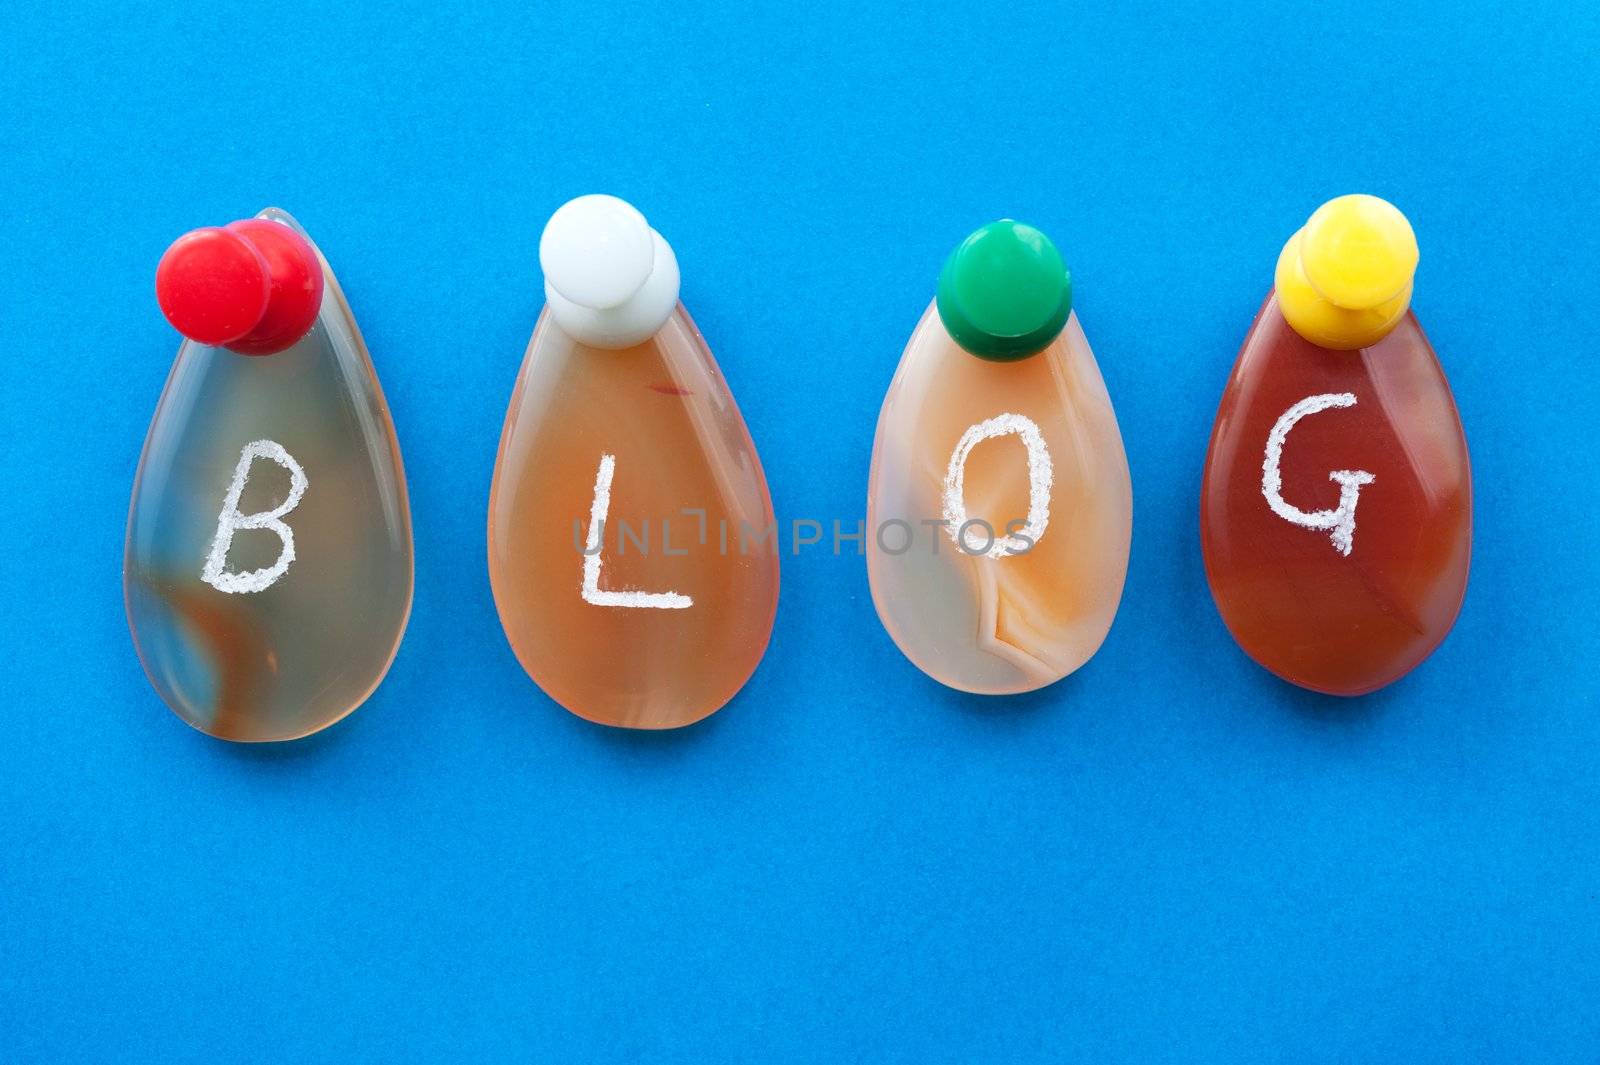 Blog word spelled with agates pinned on the board